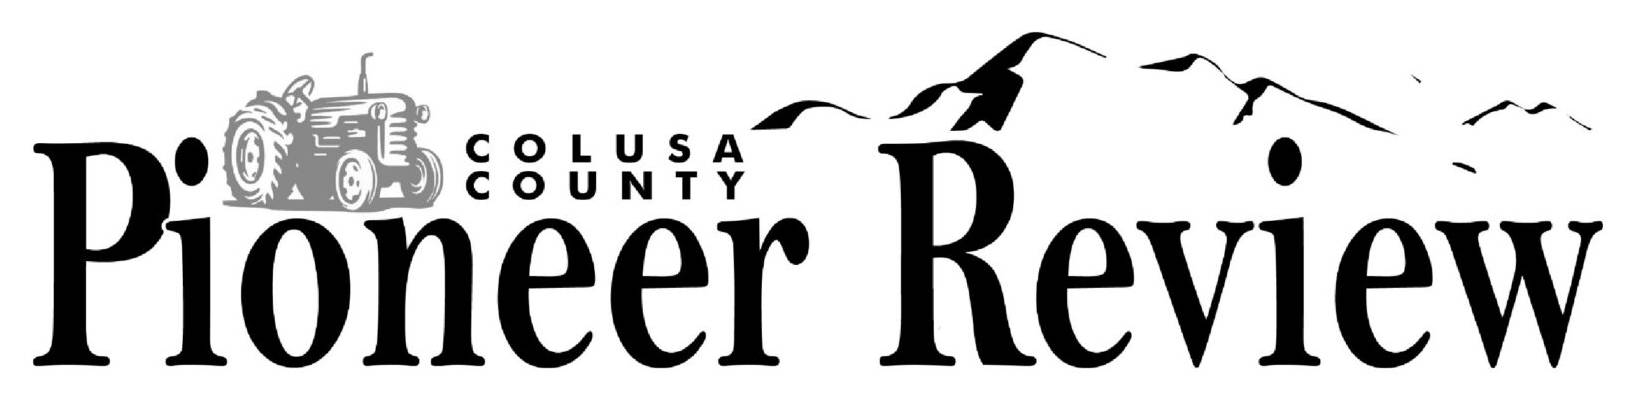 A black and white image of the logo for the county paper review.